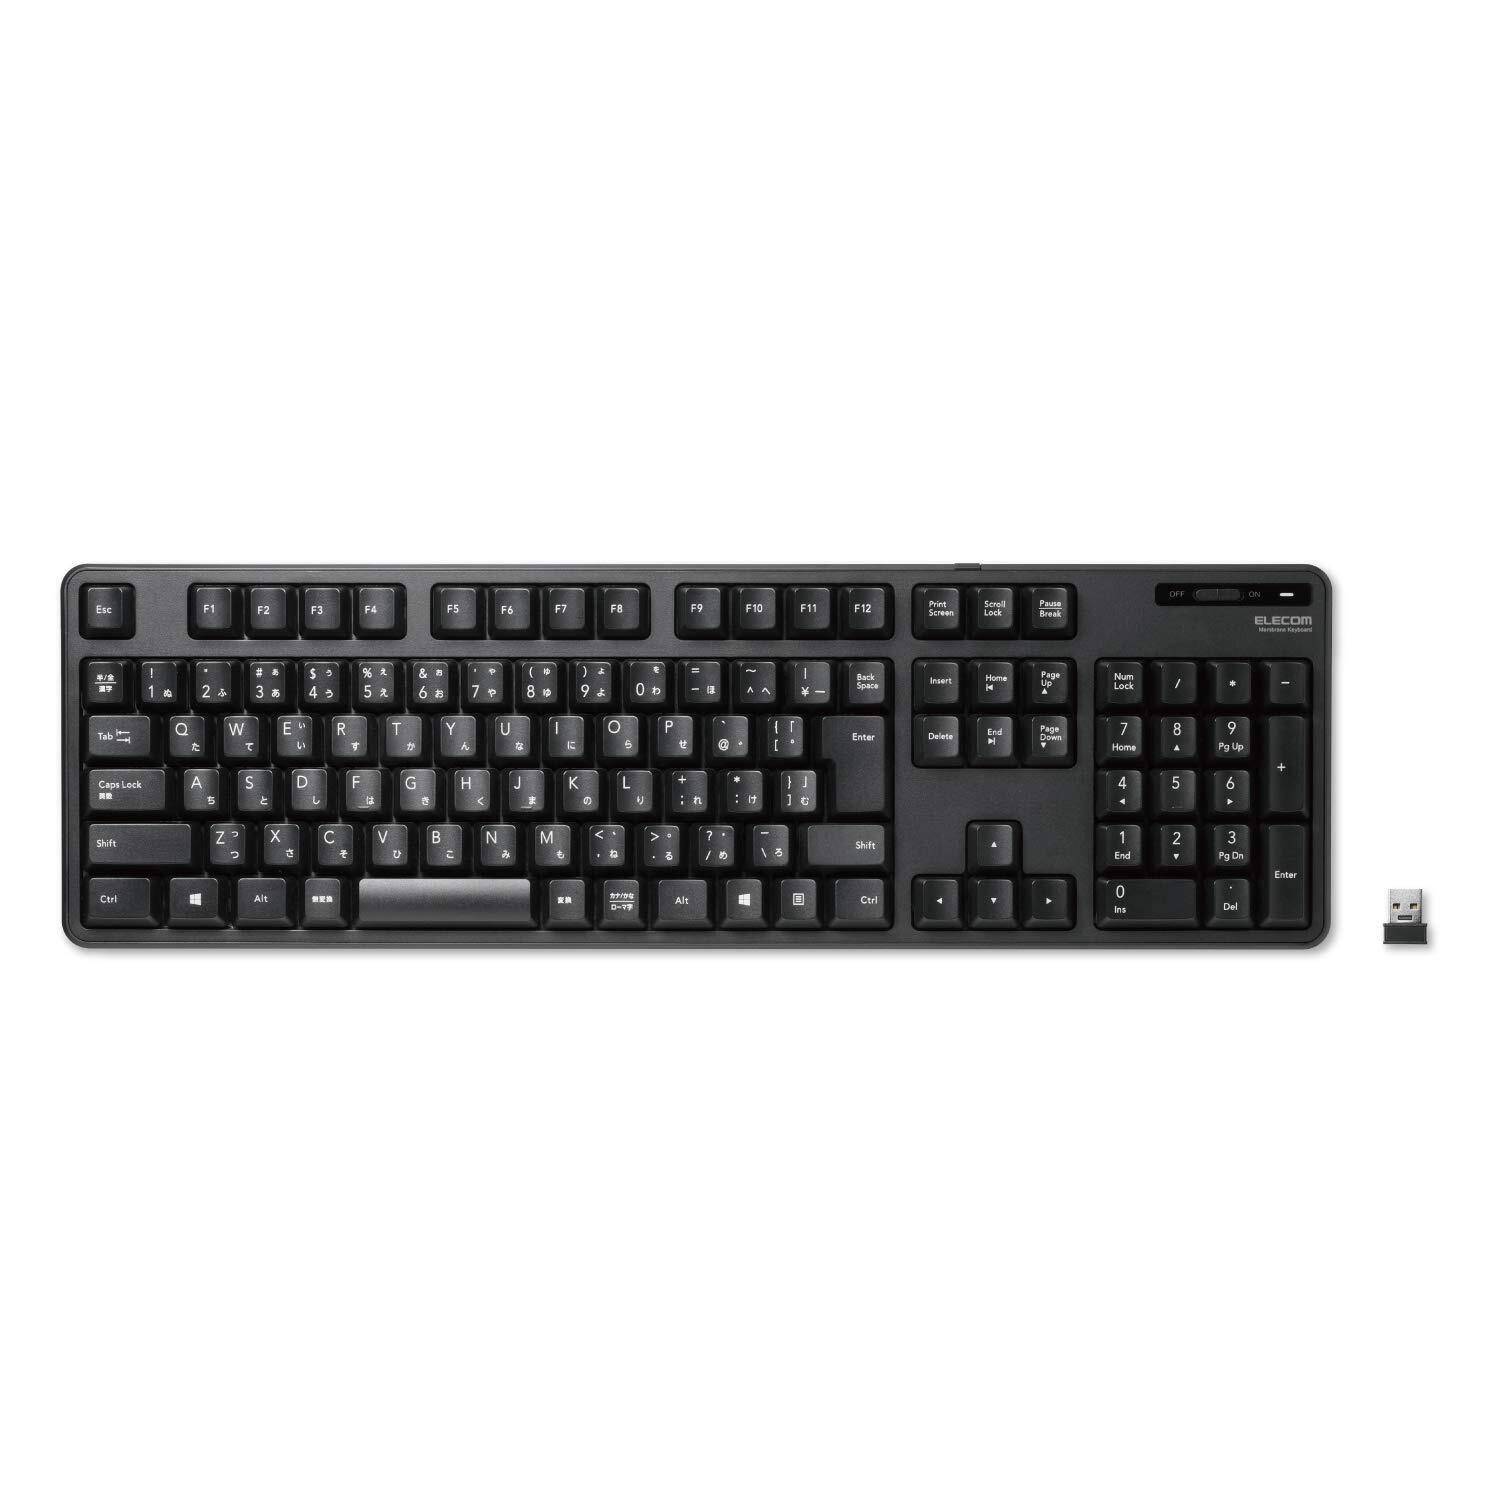 ELECOM Japanese Layout USB 2.4GHz Wireless Basic Keyboard for Computer and La...